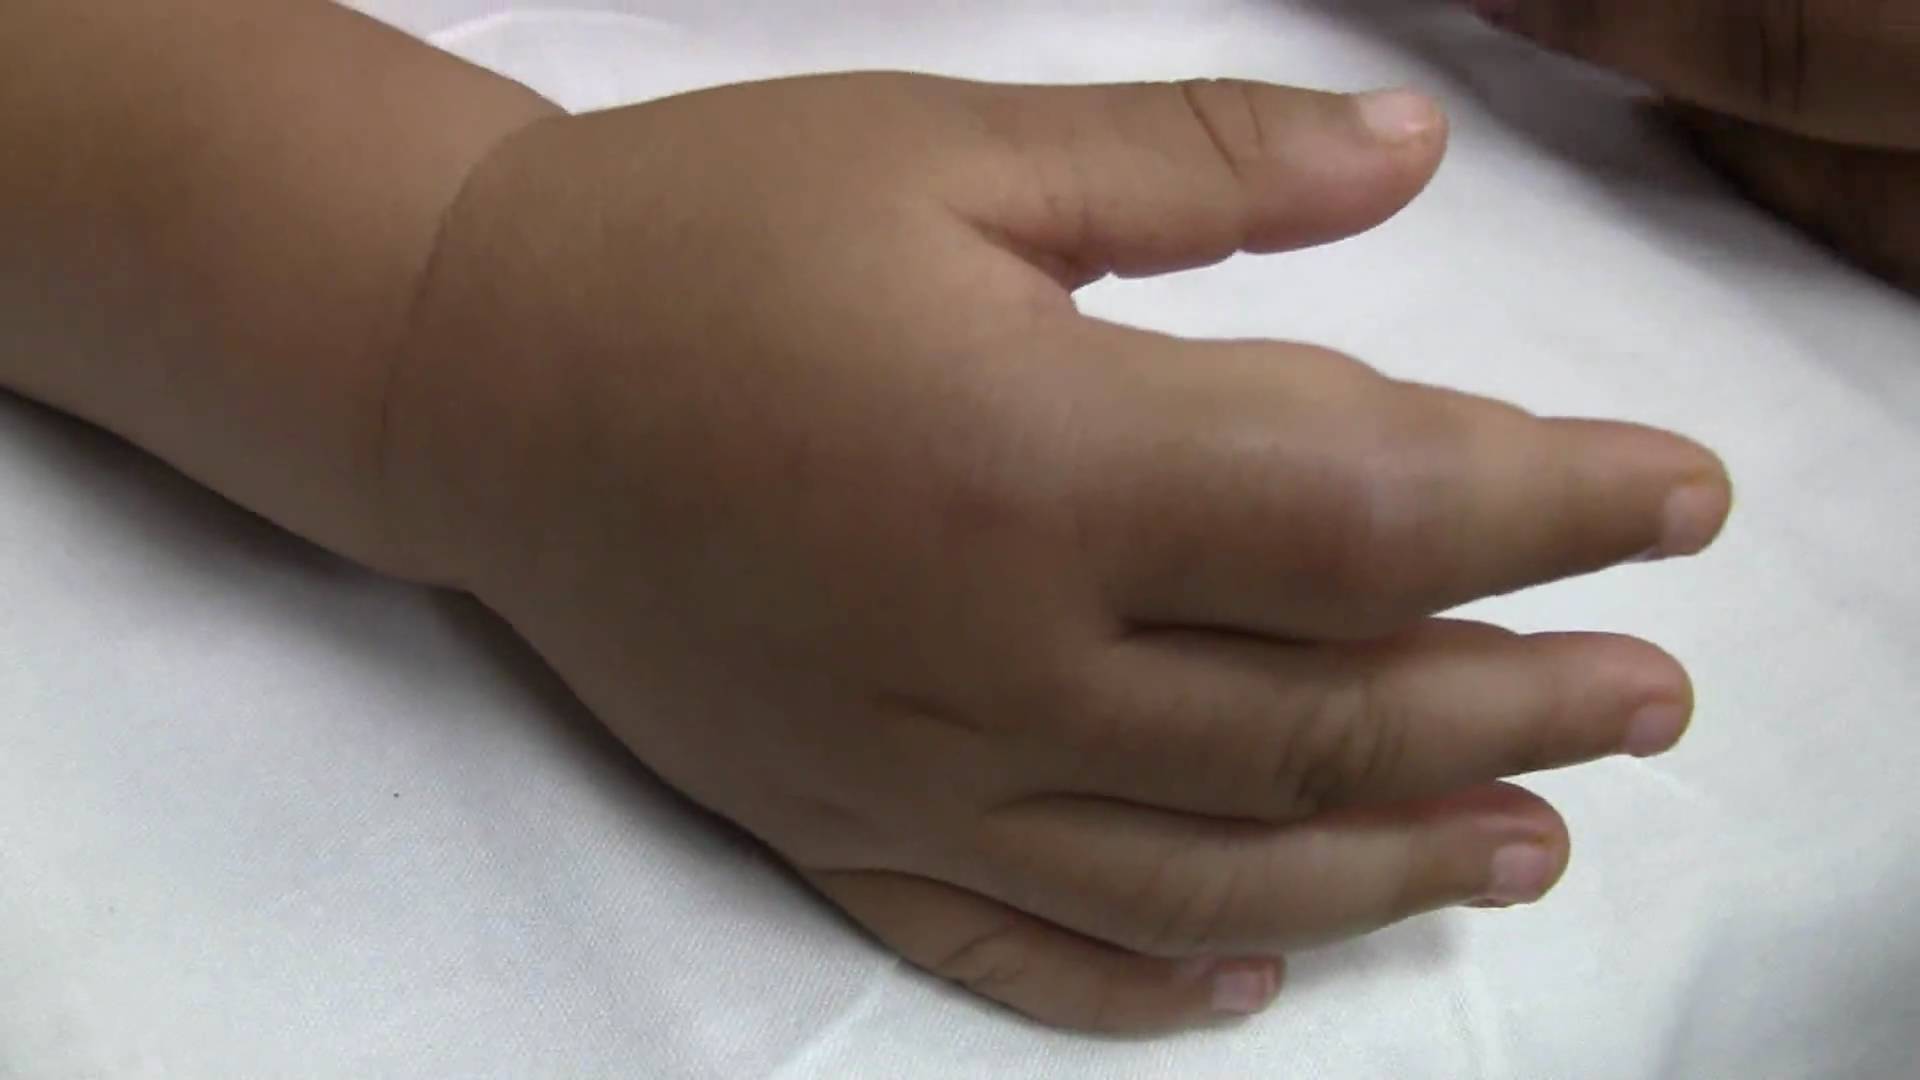 Swelling in the hands of a patient with sickle cell disease (source)